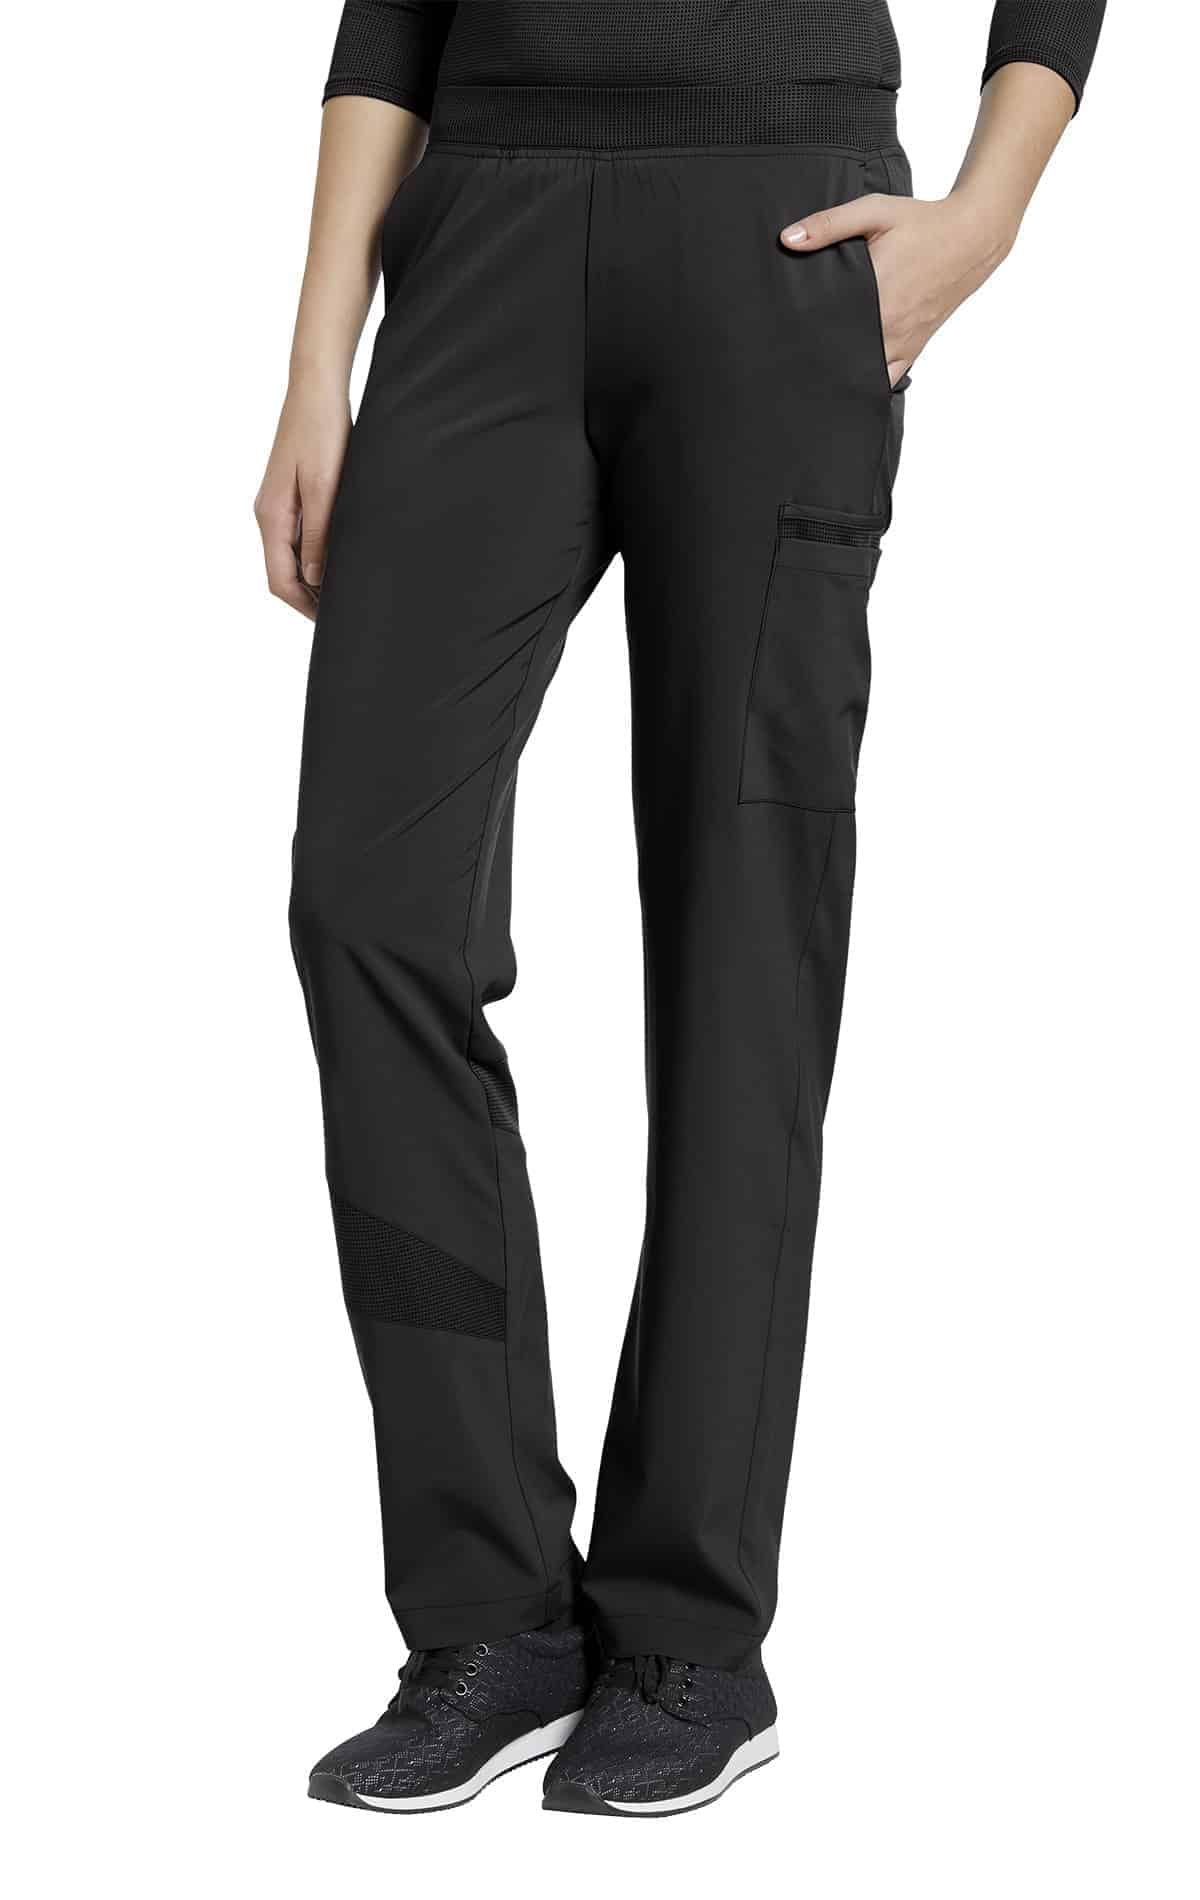 FIT Stretch Waistband Pant